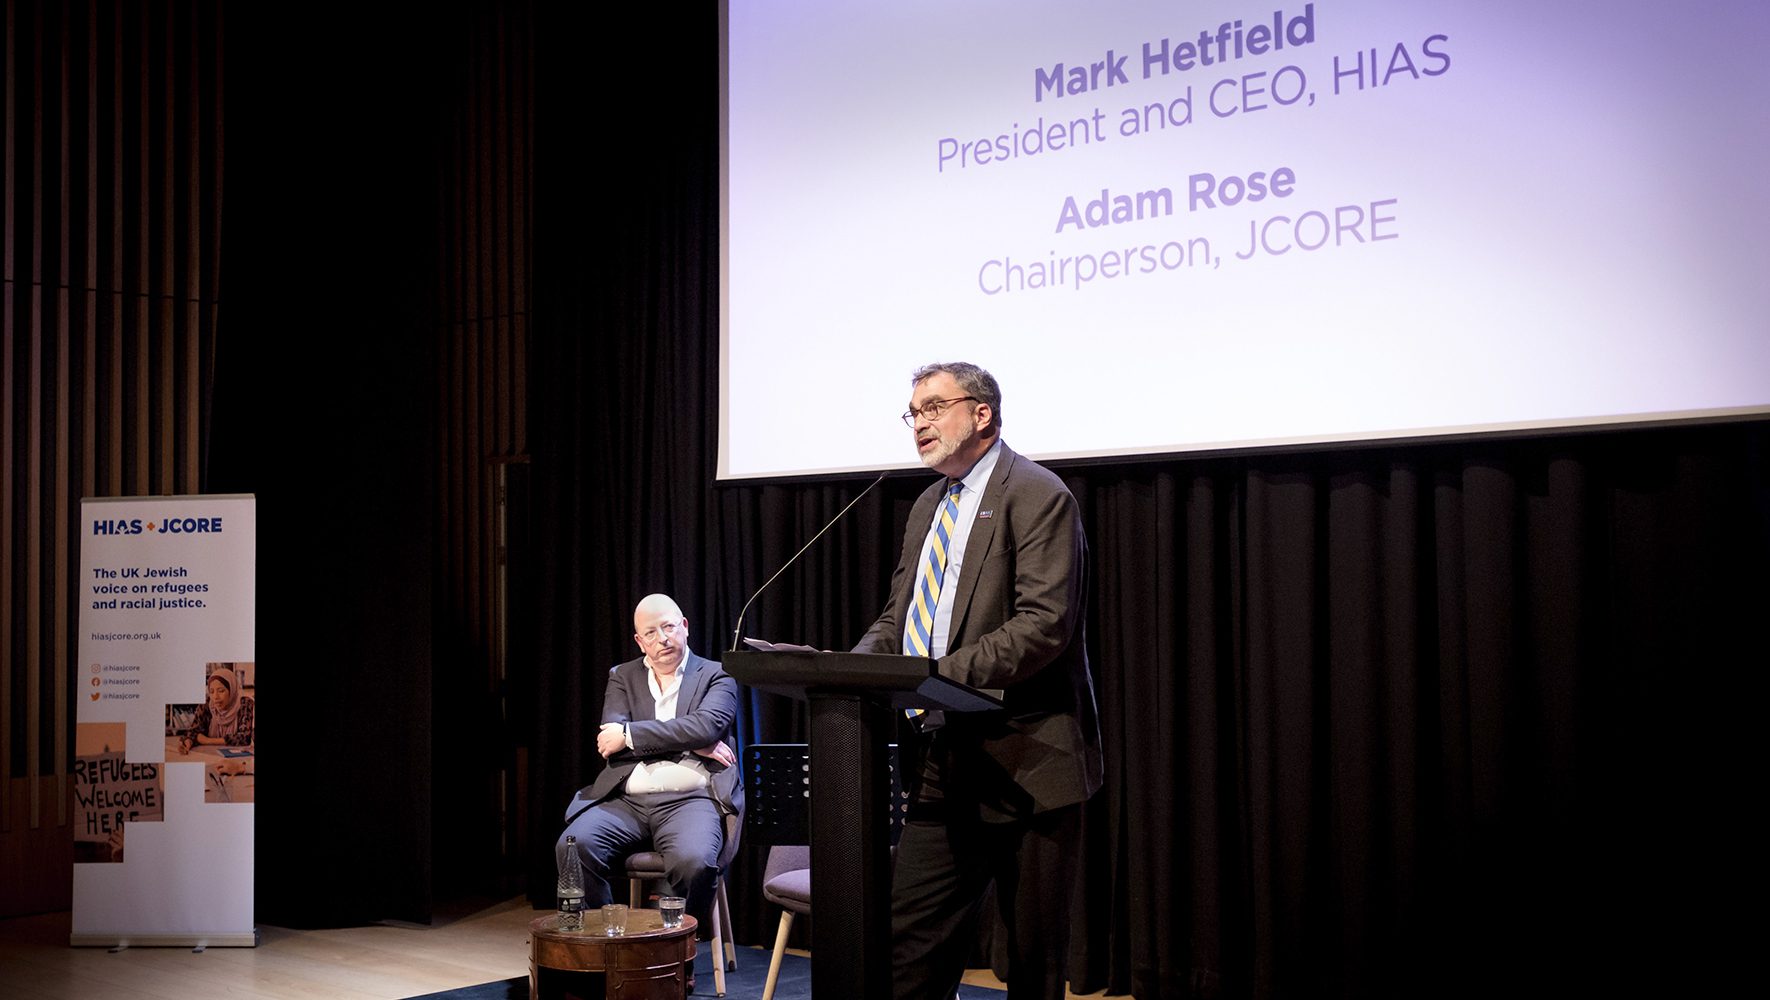 HIAS President and CEO Mark Hetfield welcomes the audience as HIAS+JCORE Chairperson Adam Rose looks on at the JW3 in London, March 28, 2023. (Mike Stone for HIAS+JCORE)